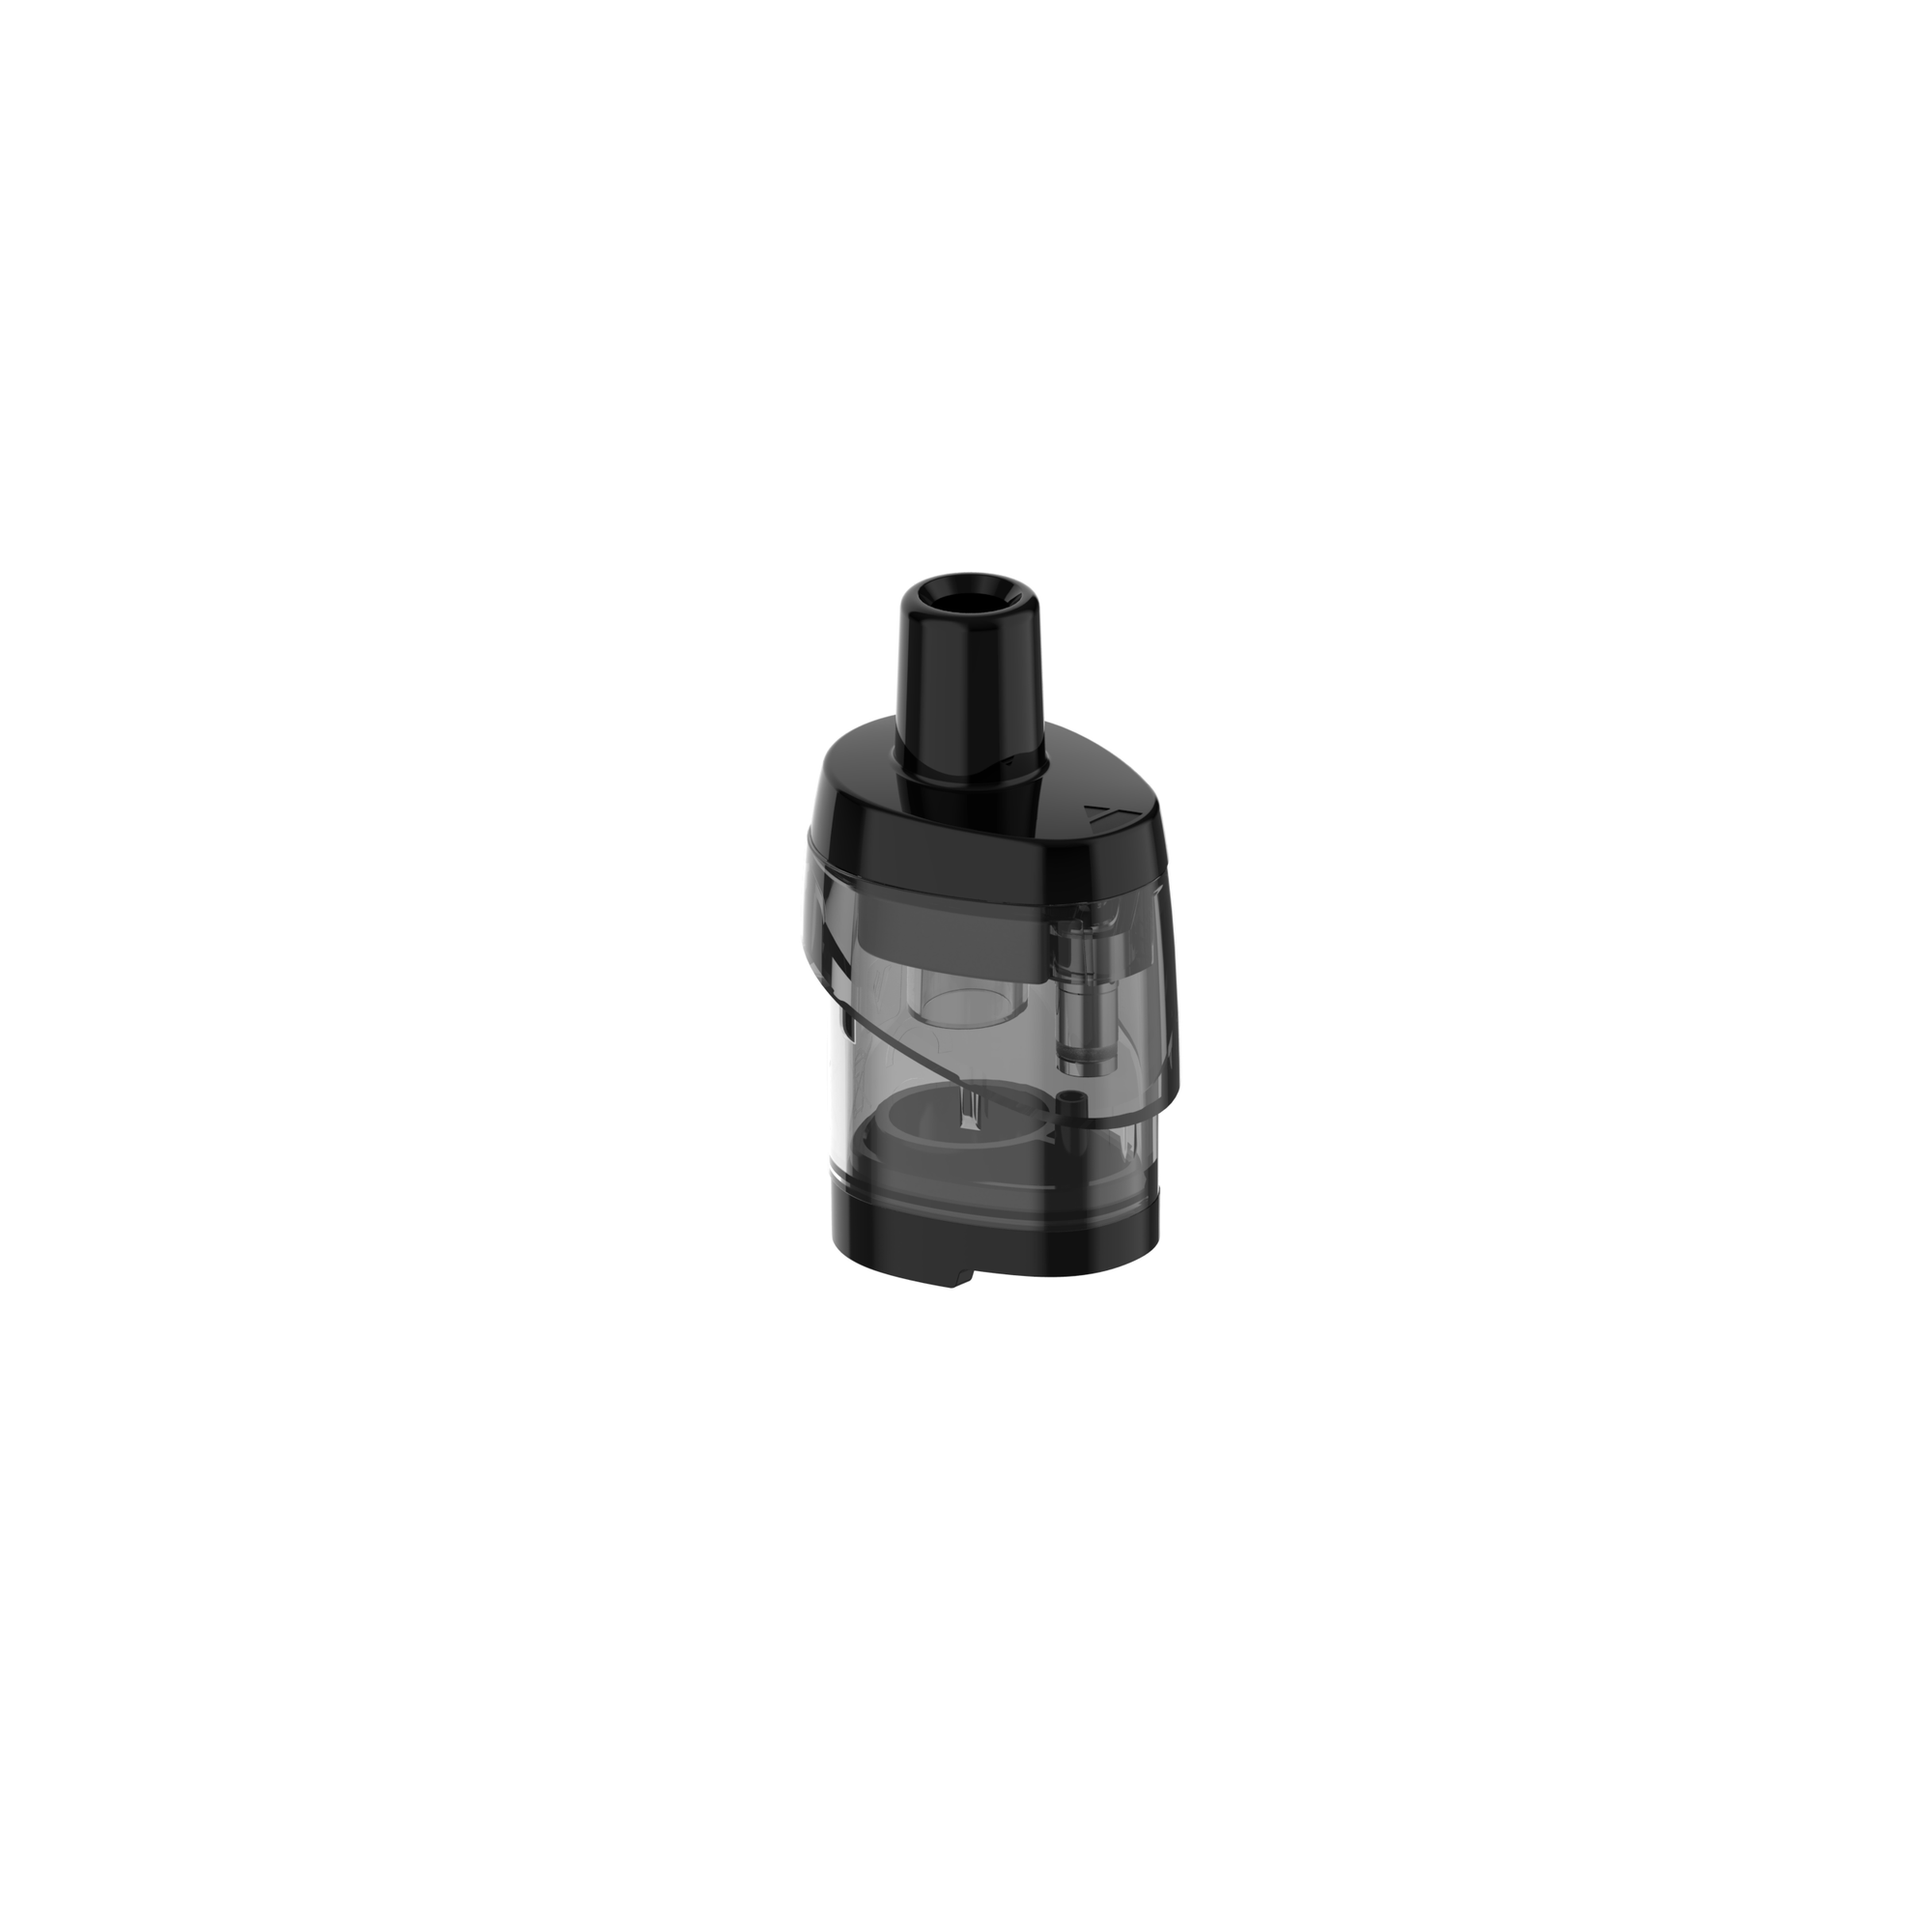 Vaporesso - Target PM30 Replacement Pods (2 Pack) - Vapoureyes